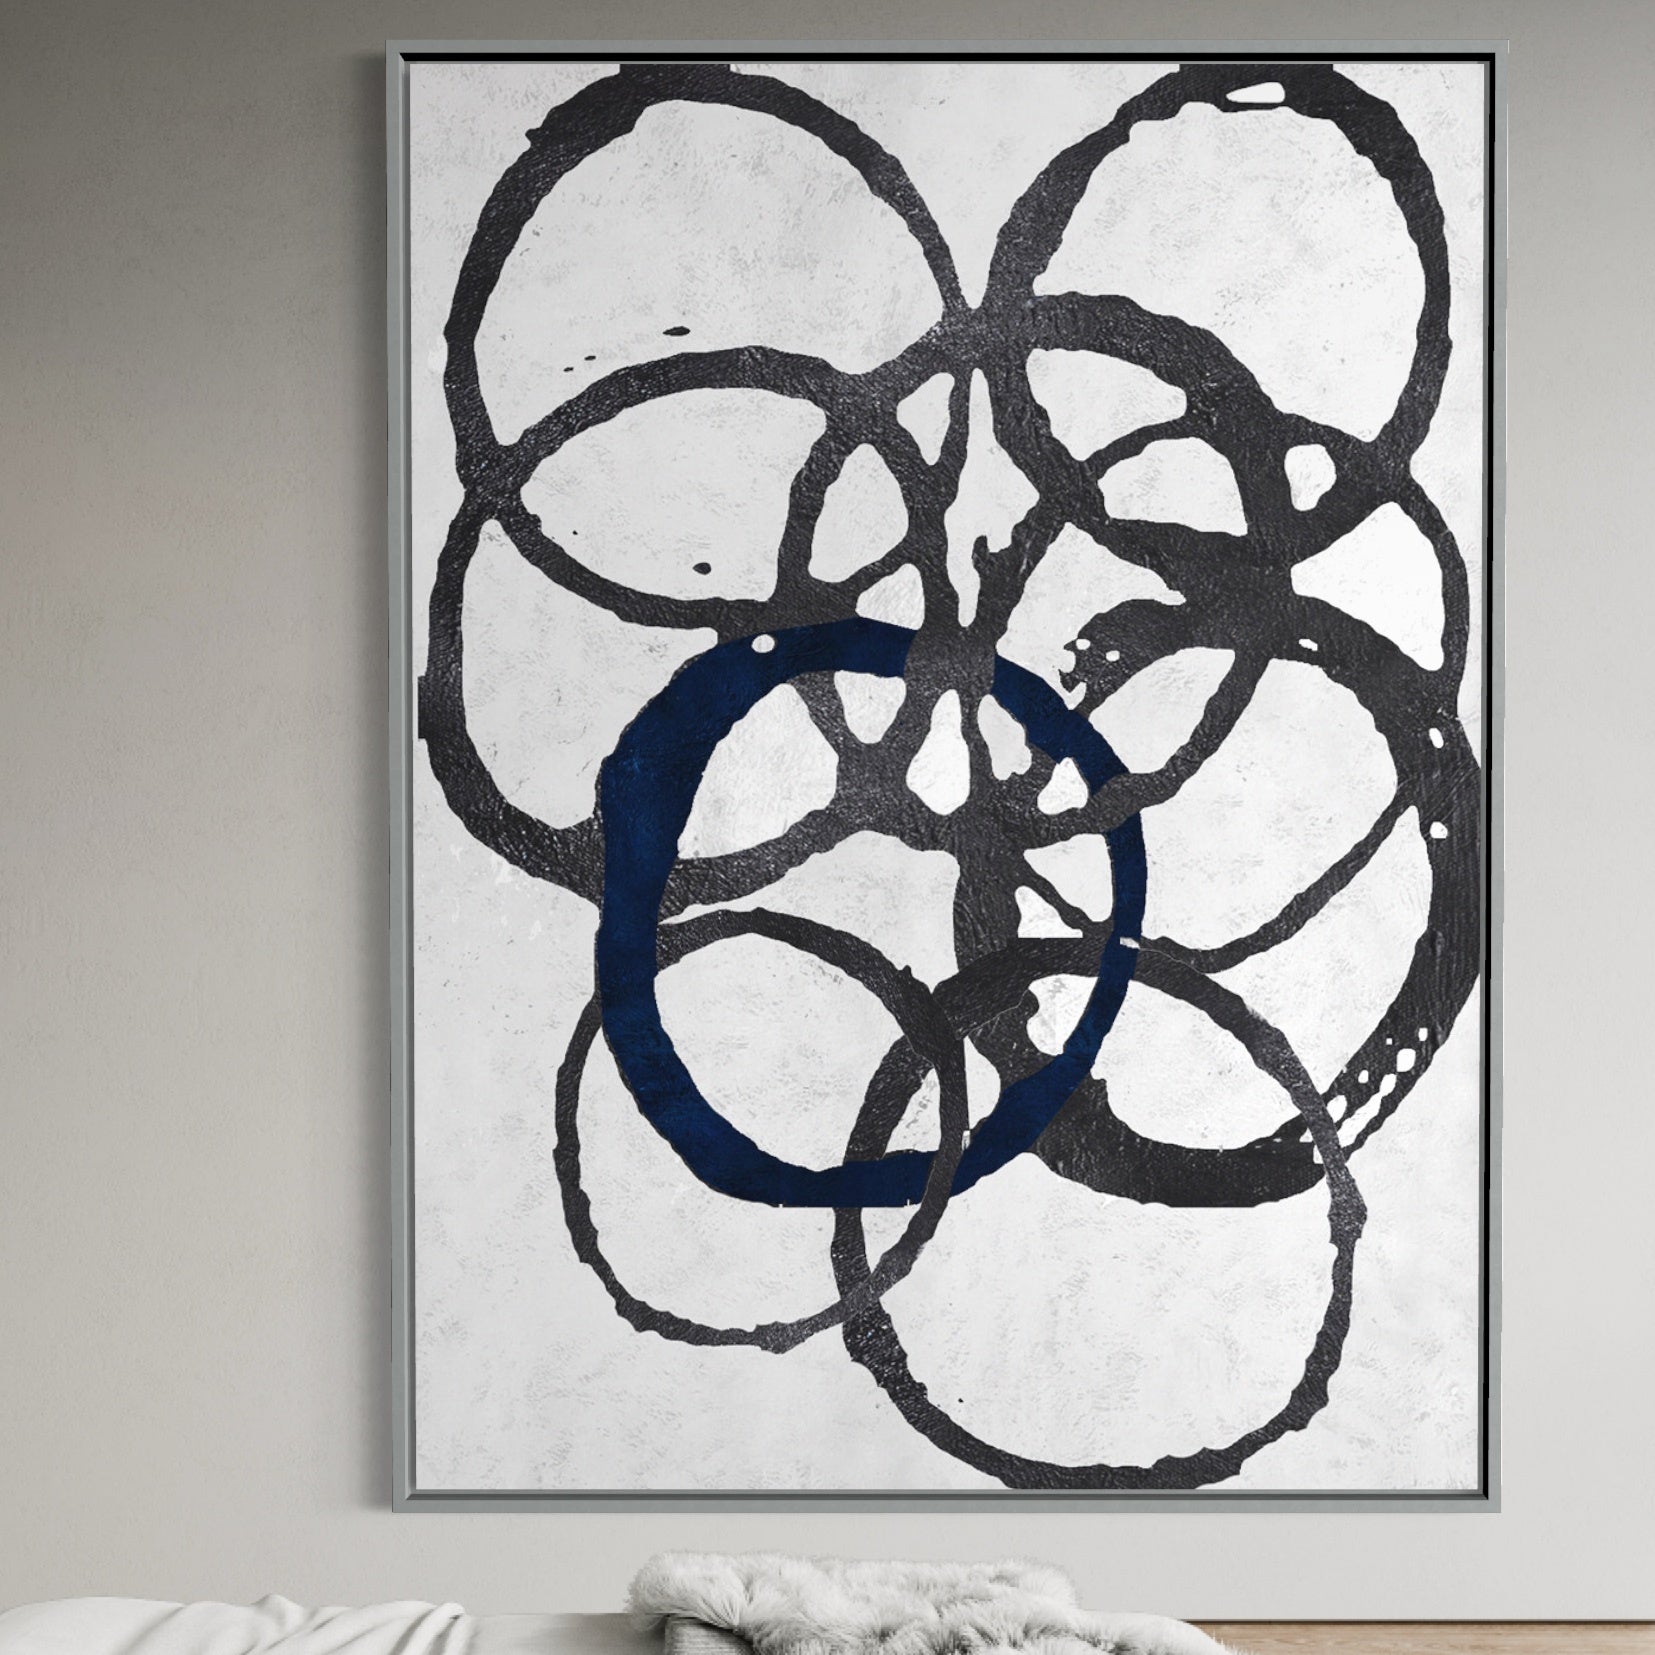 Circles And Charcoal, Black And Silver / 75x100cm